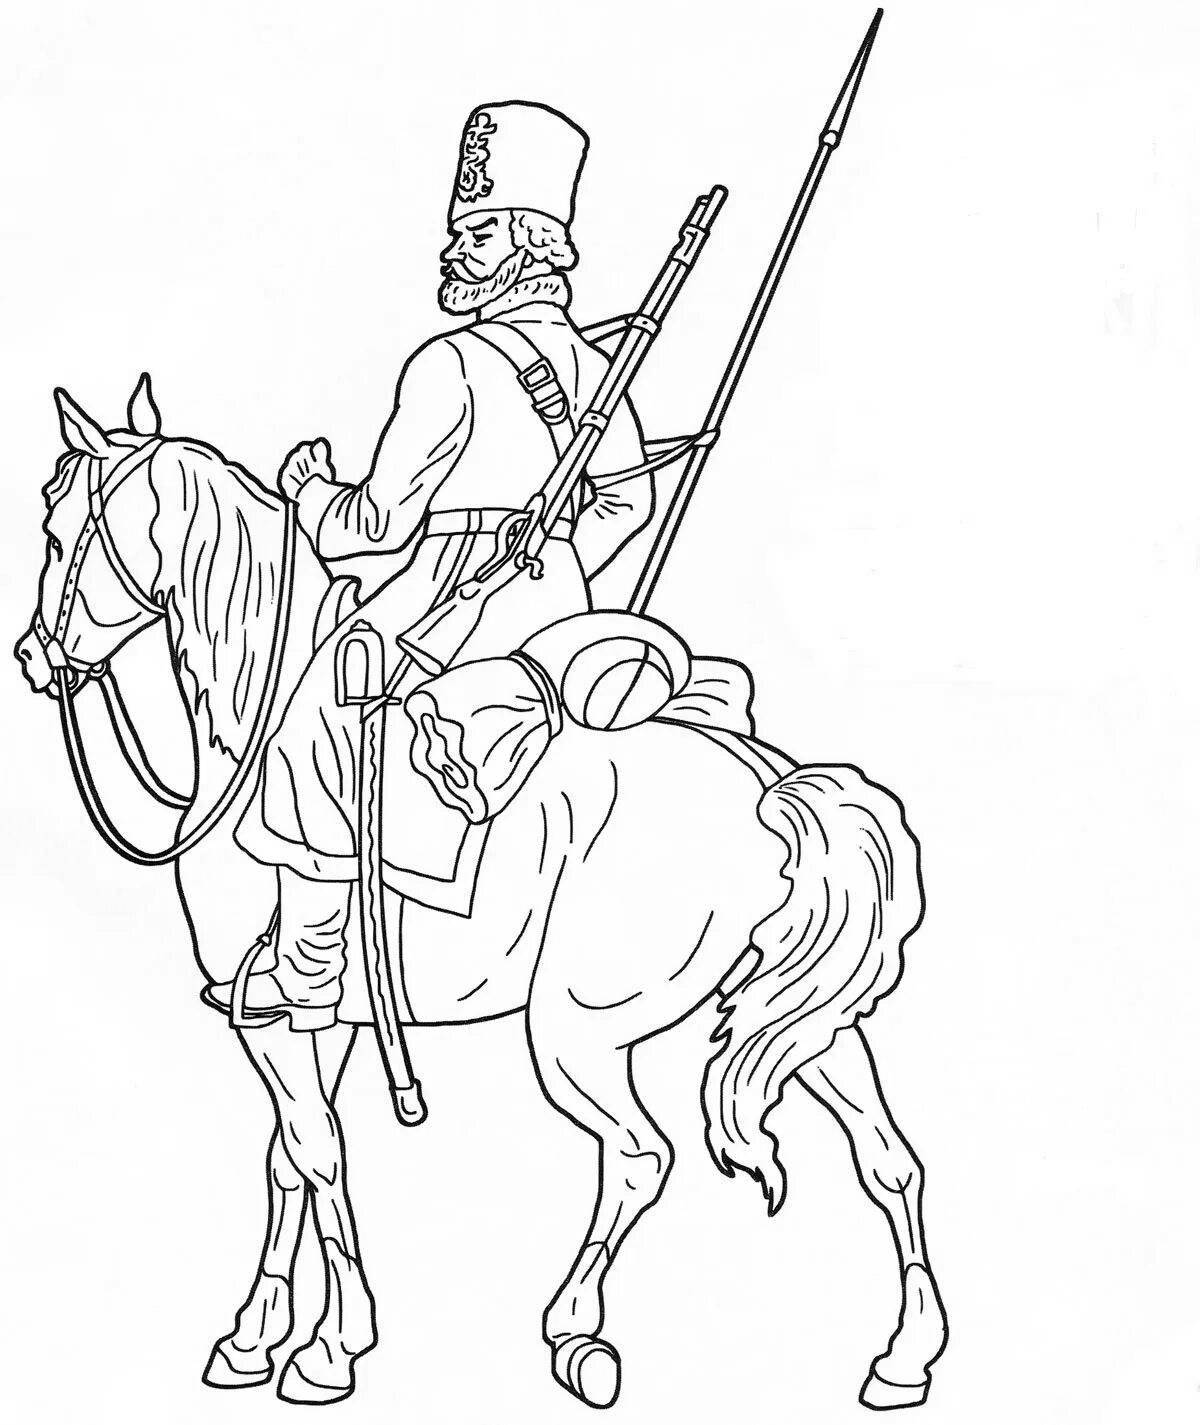 Refreshing Don Cossacks coloring book